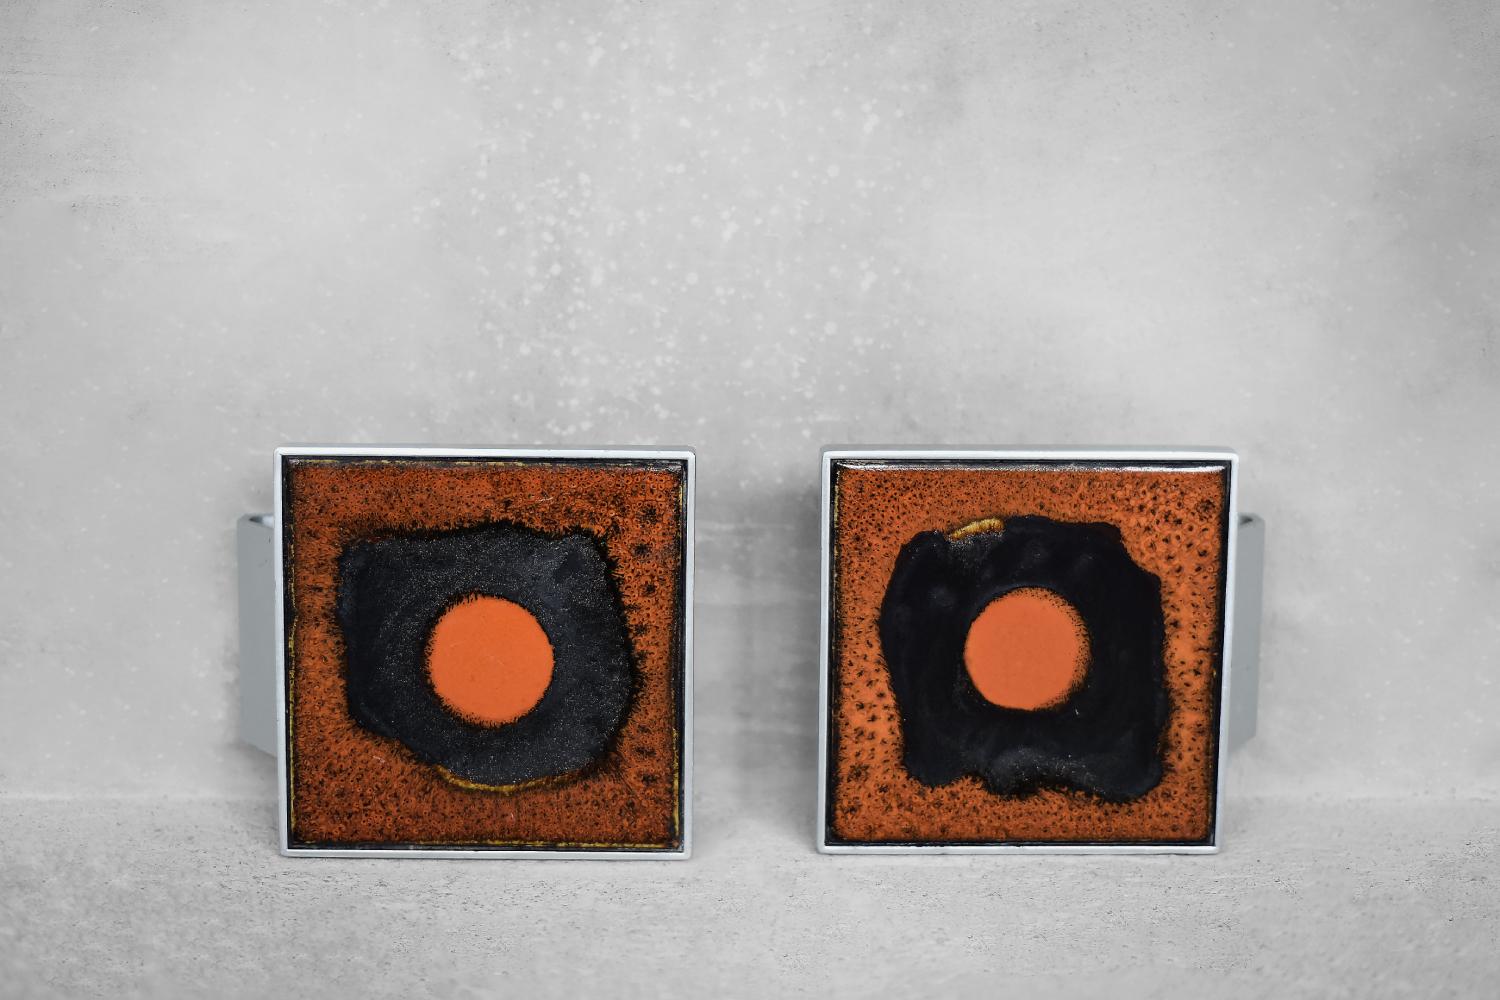 This pair of original door handles was designed and made by the Belgian artist Juliette Belarti during the 1960s. The geometric frame is made of aluminum and the center is filled with an orange and black glazed ceramic board. The combination of